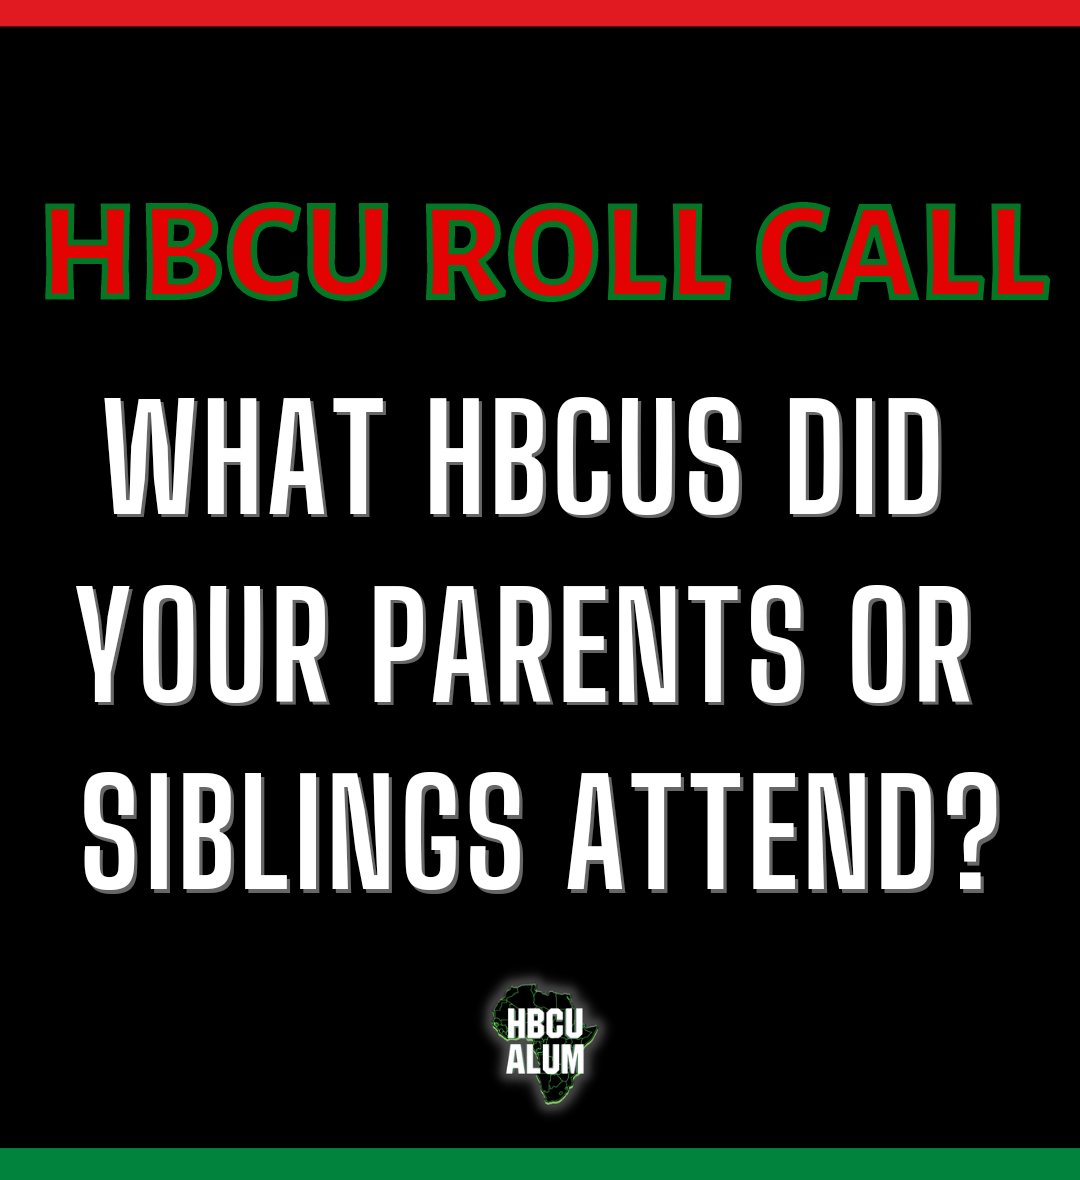 We tend to always represent for our own schools, but what HBCUs did your family attend!? Show them some love! 👇🏾 #HBCUs